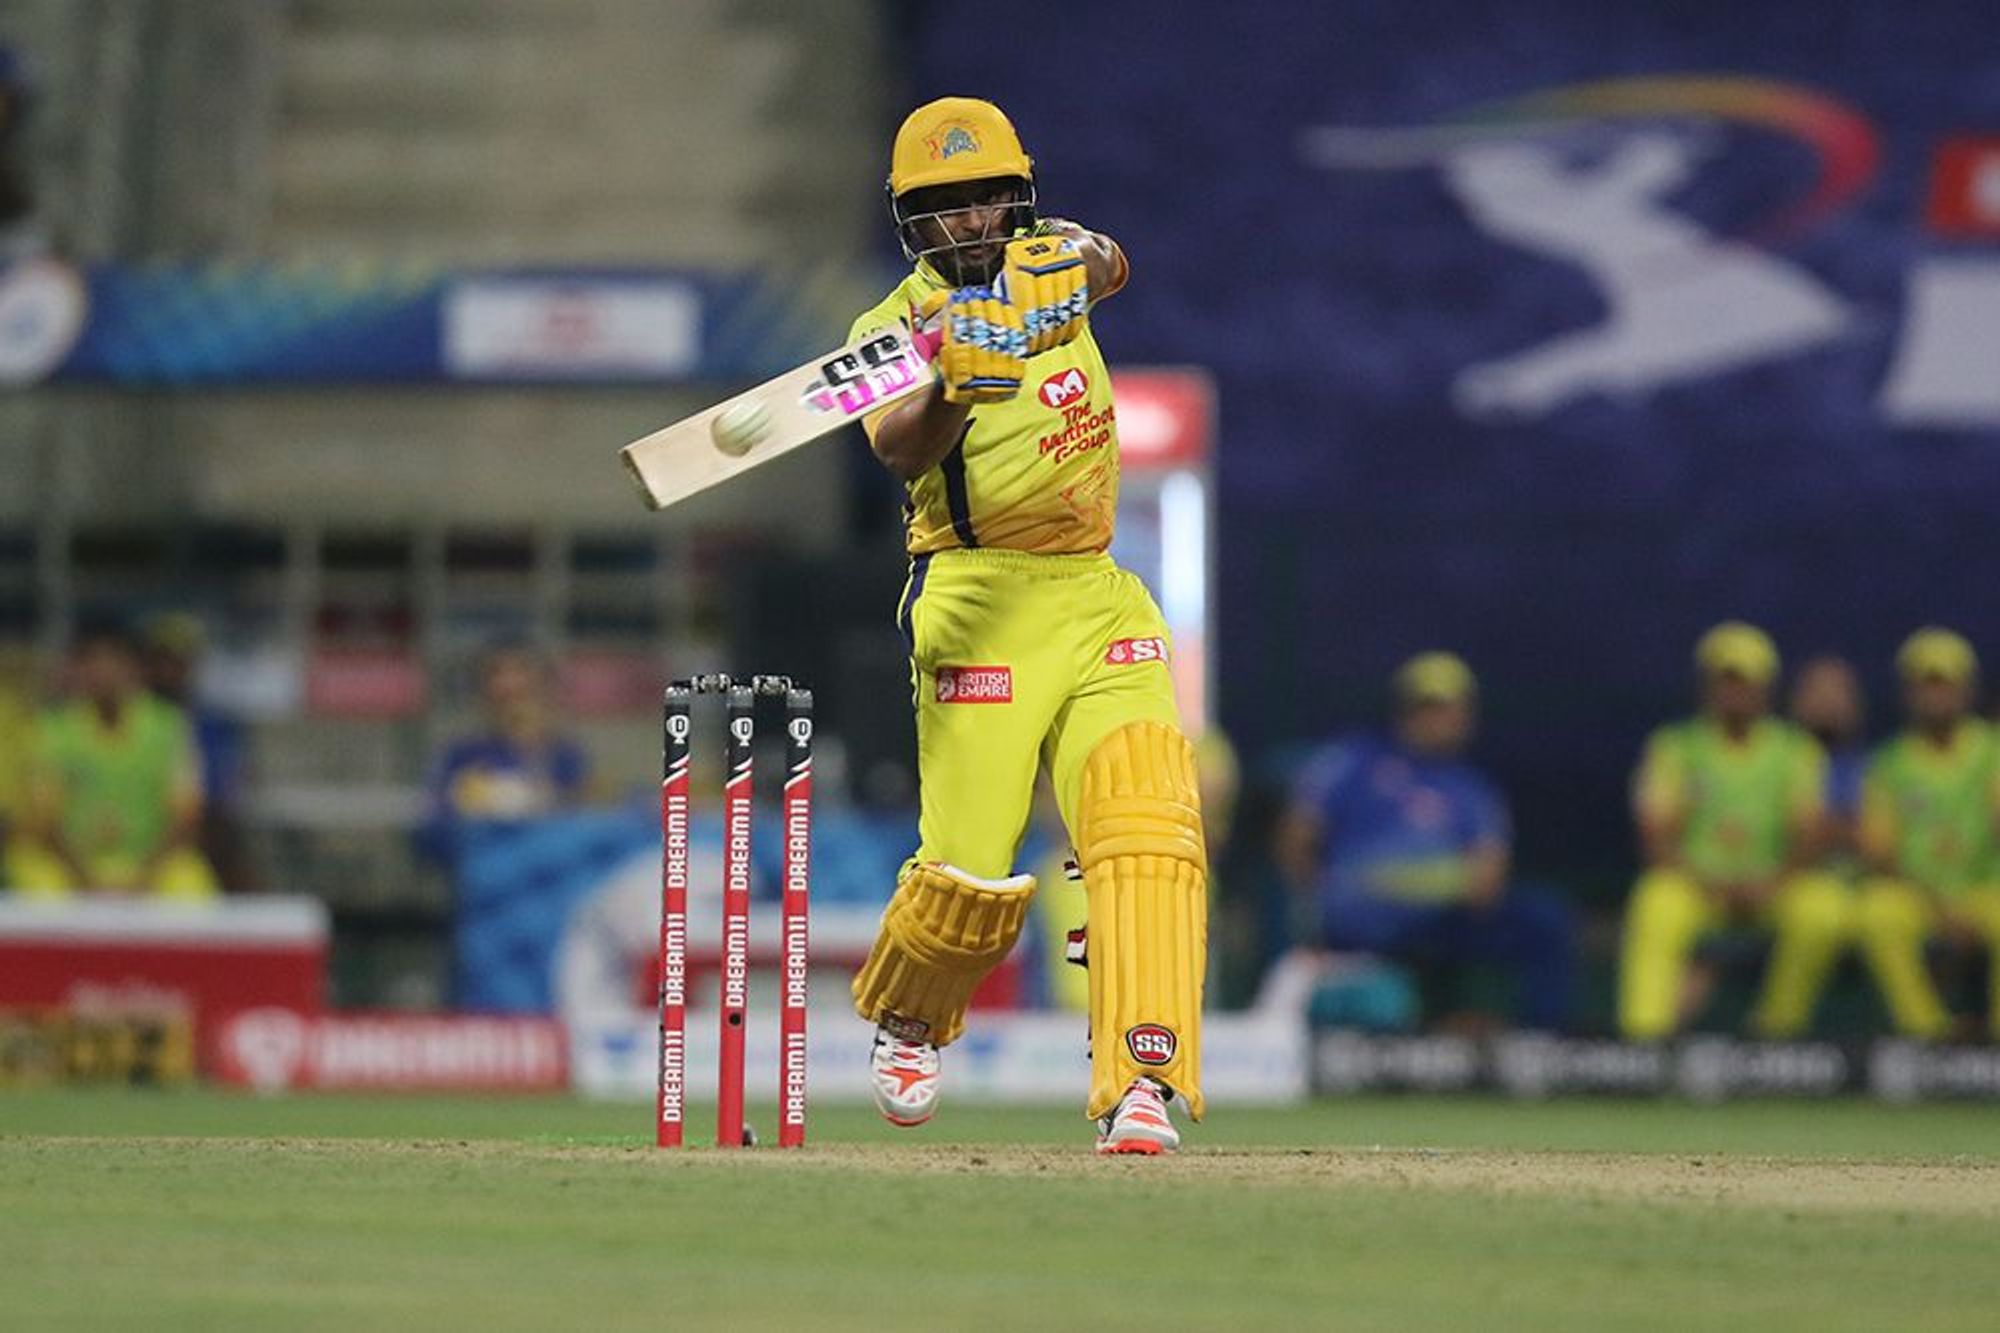 Reports | First week of IPL 2020 watched by record 269 million viewers